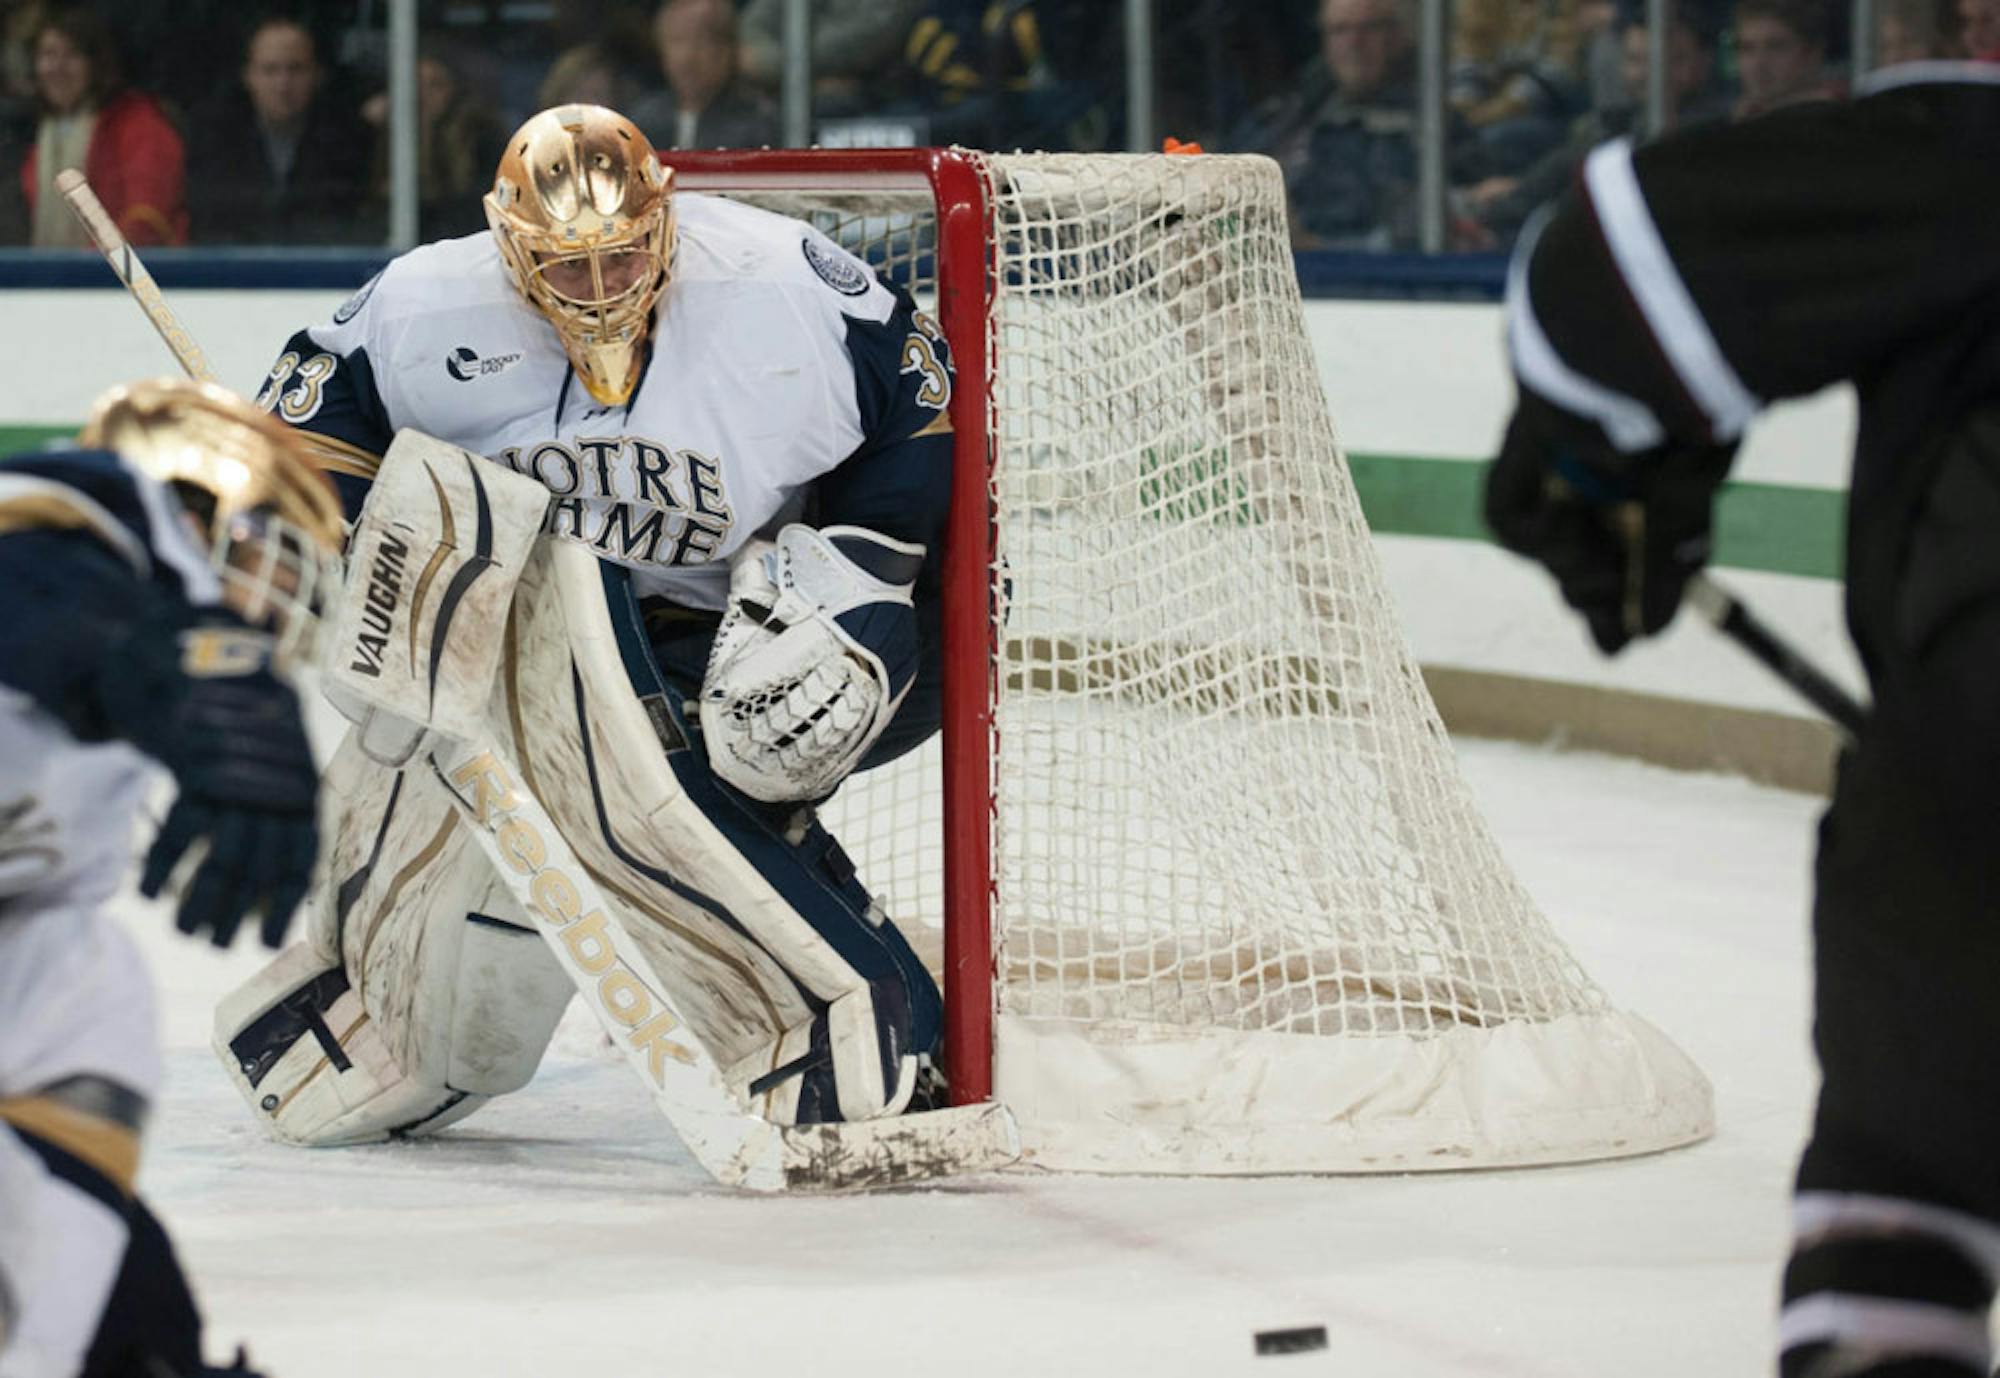 Irish freshman goalie Cal Petersen tracks the puck during Notre Dame’s 3-2 overtime loss to Union College on Nov. 28 at Compton Family Ice Arena. Petersen is 5-8-1 with a .904 save percentage between the pipes.